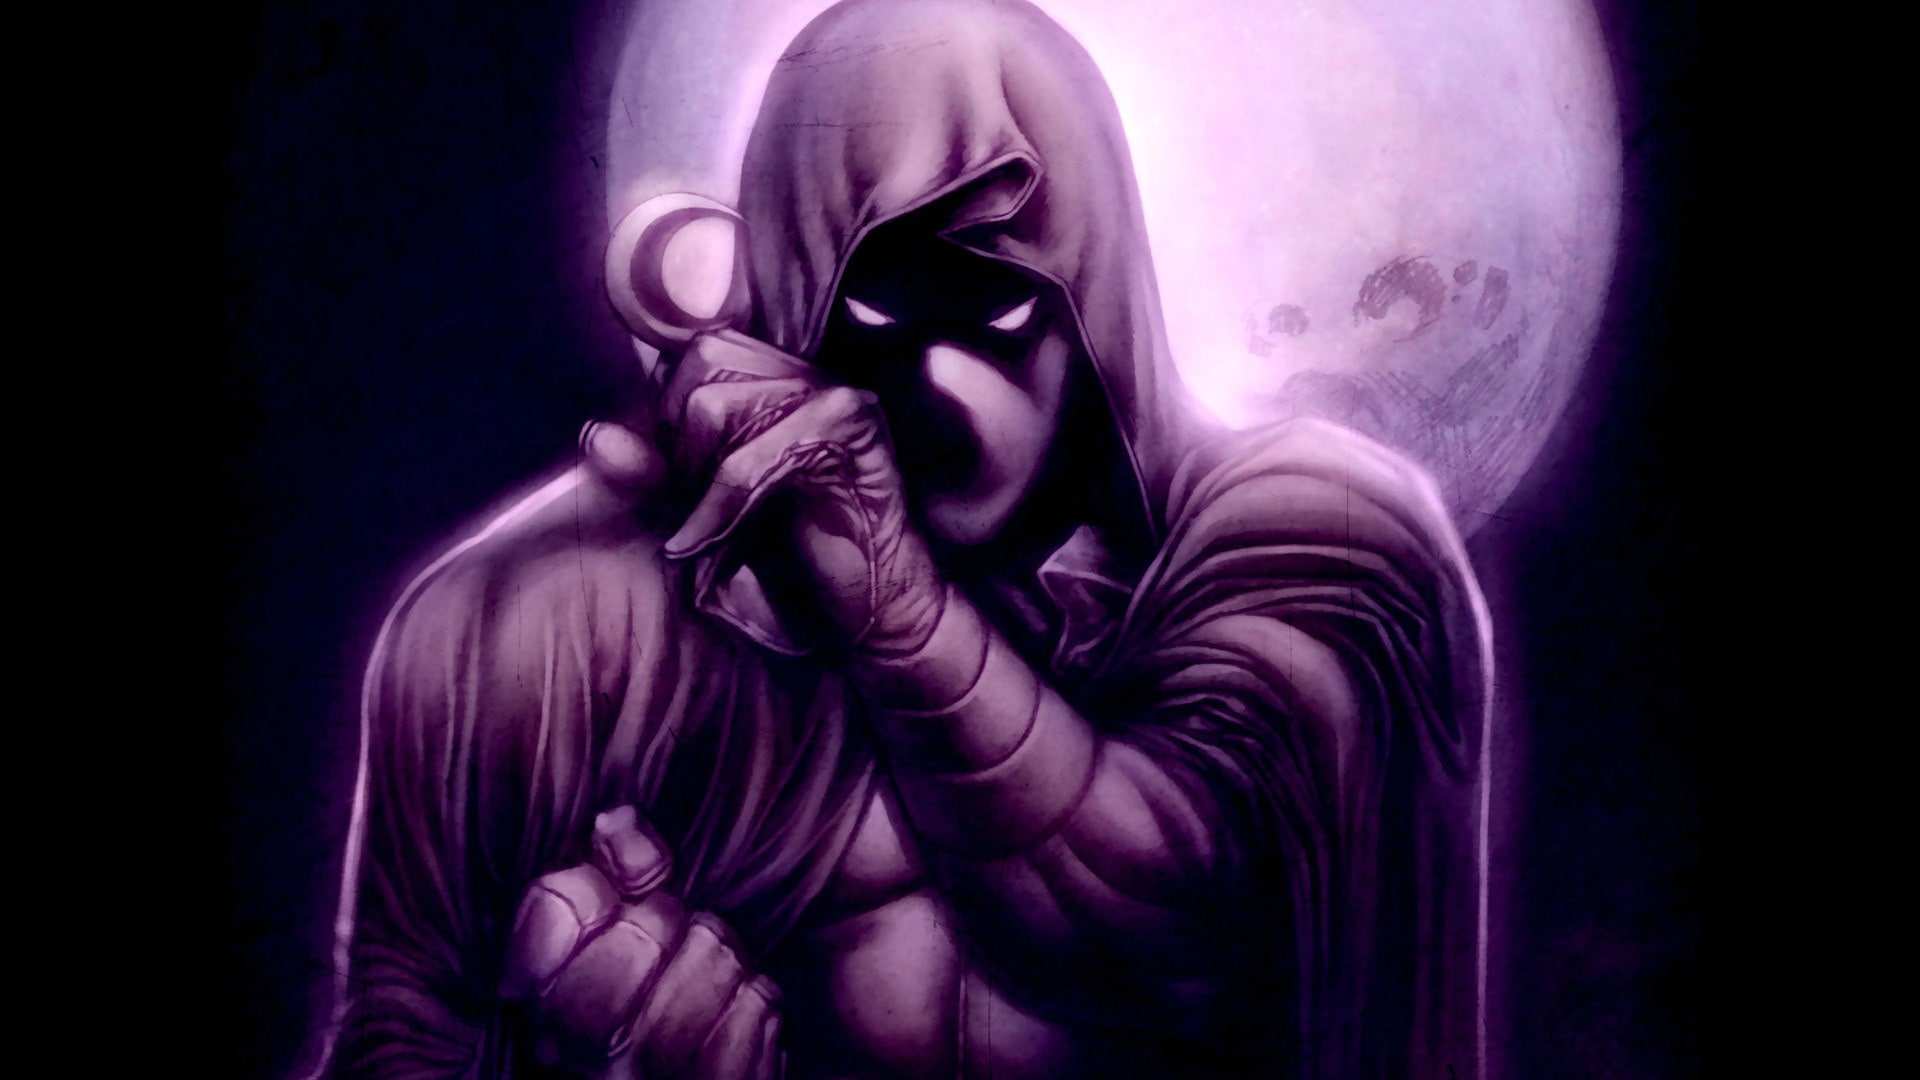 Wallpaper Moon Knight, One Person, Adult, Human